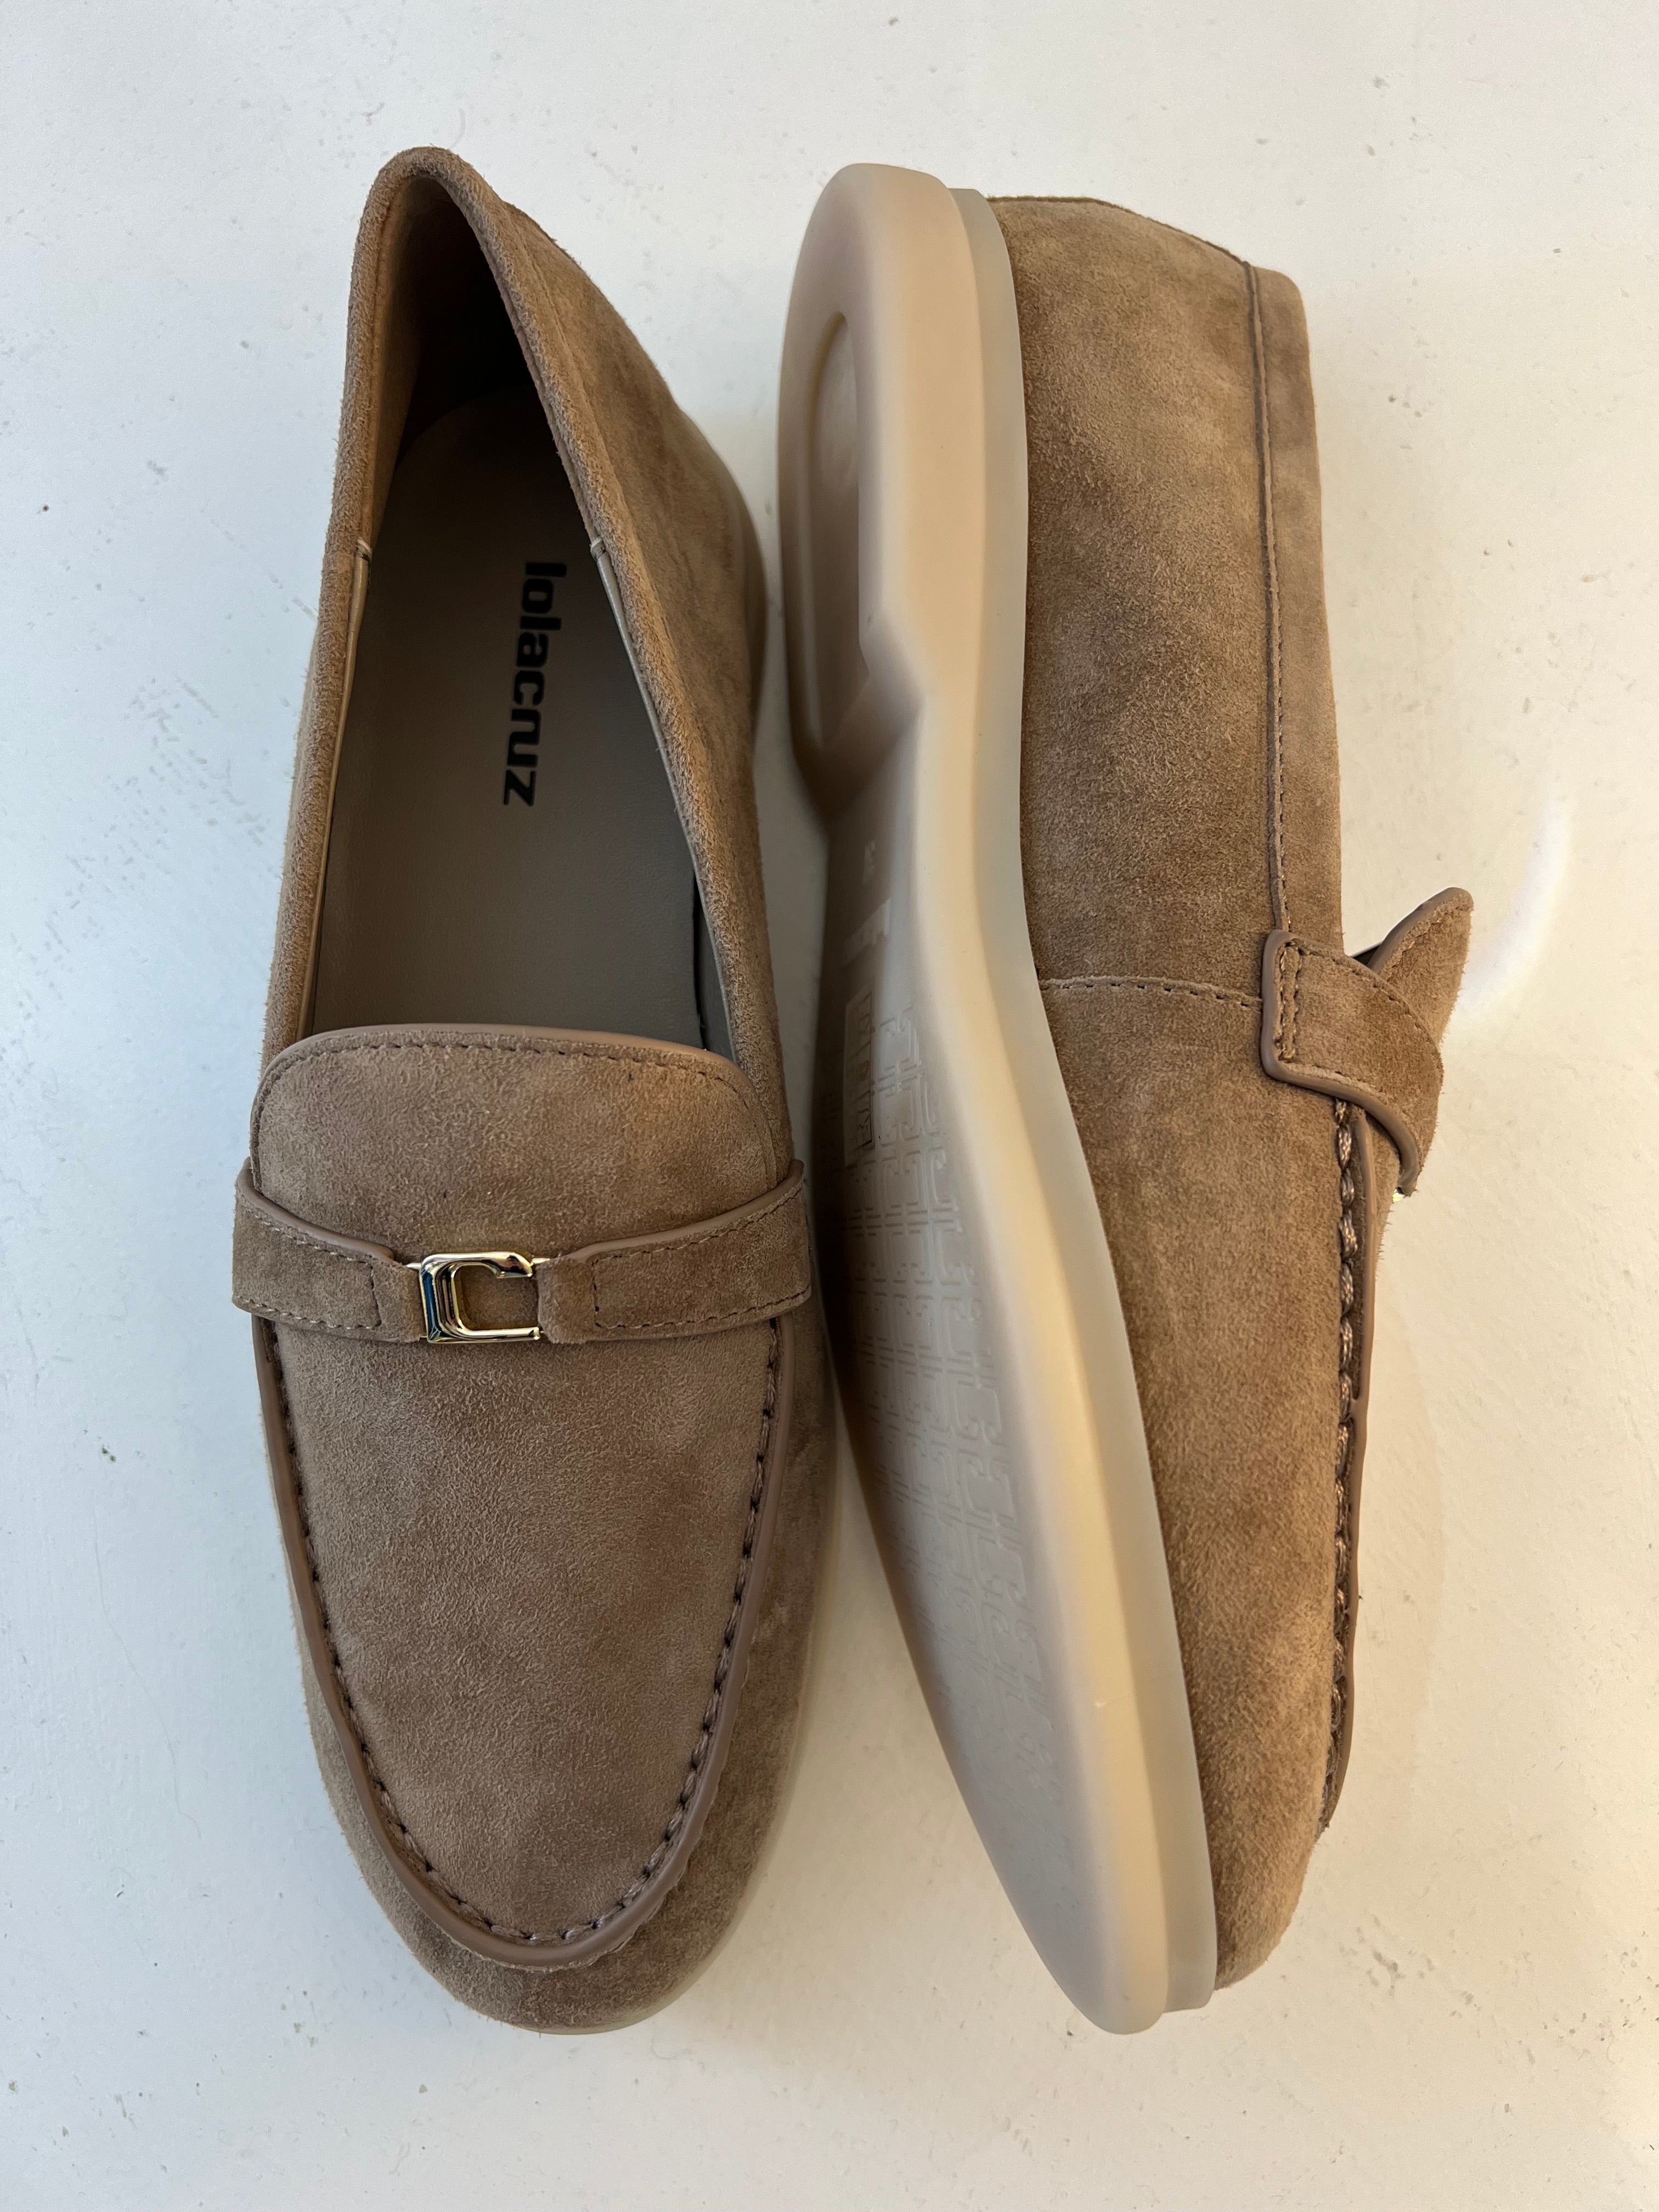 Hetre Alresford Hampshire Shoe Store Lola Cruz Taupe Suede Loafer 